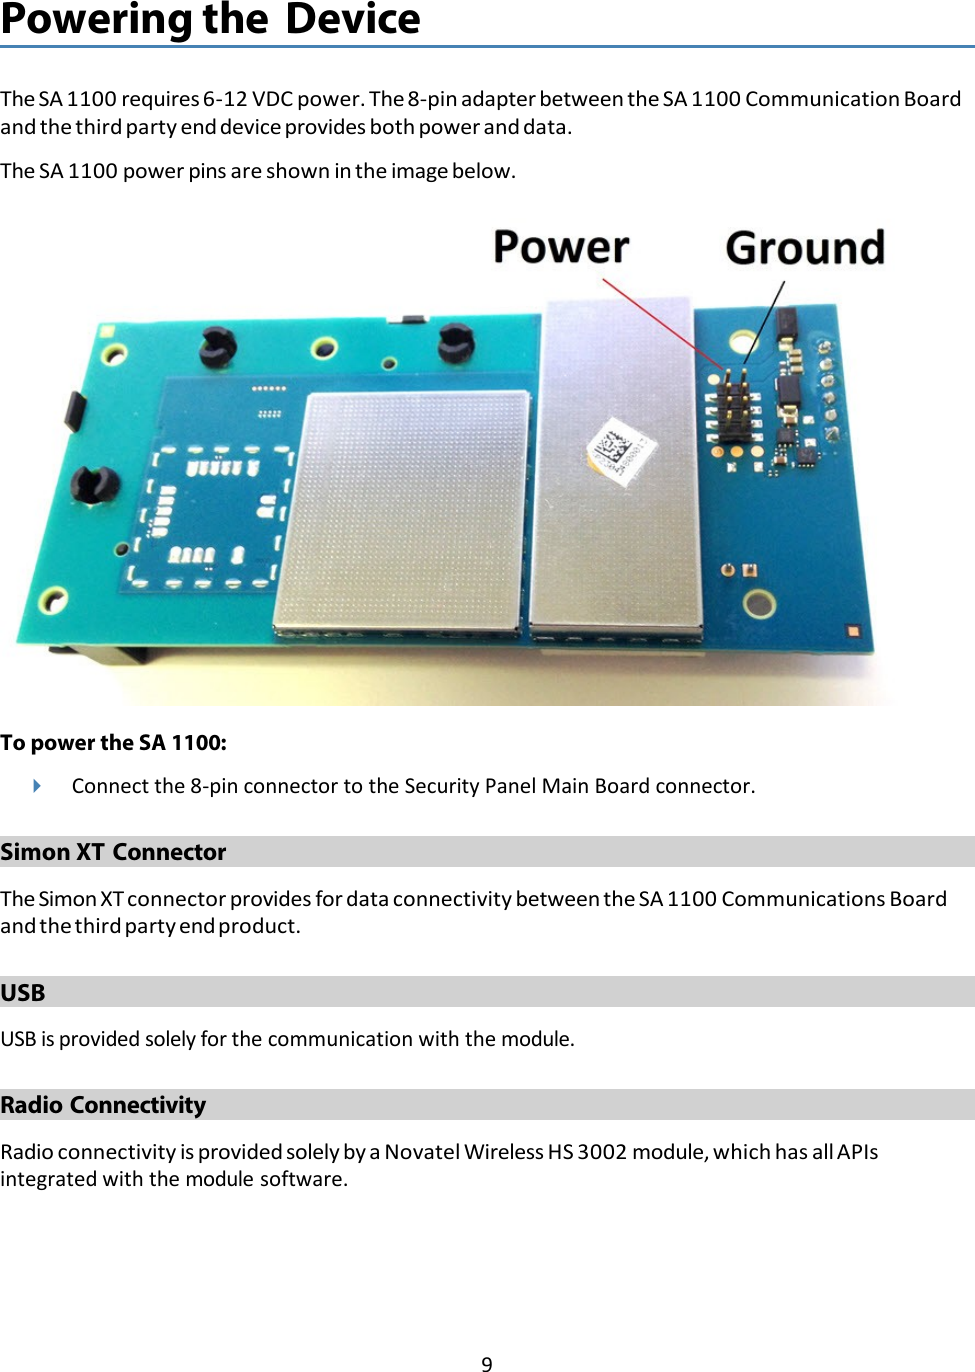 9   Powering the Device   The SA 1100 requires 6-12 VDC power. The 8-pin adapter between the SA 1100 Communication Board and the third party end device provides both power and data. The SA 1100 power pins are shown in the image below.    To power the SA 1100:  Connect the 8-pin connector to the Security Panel Main Board connector.  Simon XT Connector  The Simon XT connector provides for data connectivity between the SA 1100 Communications Board and the third party end product.  USB  USB is provided solely for the communication with the module.  Radio Connectivity  Radio connectivity is provided solely by a Novatel Wireless HS 3002 module, which has all APIs integrated with the module software. 